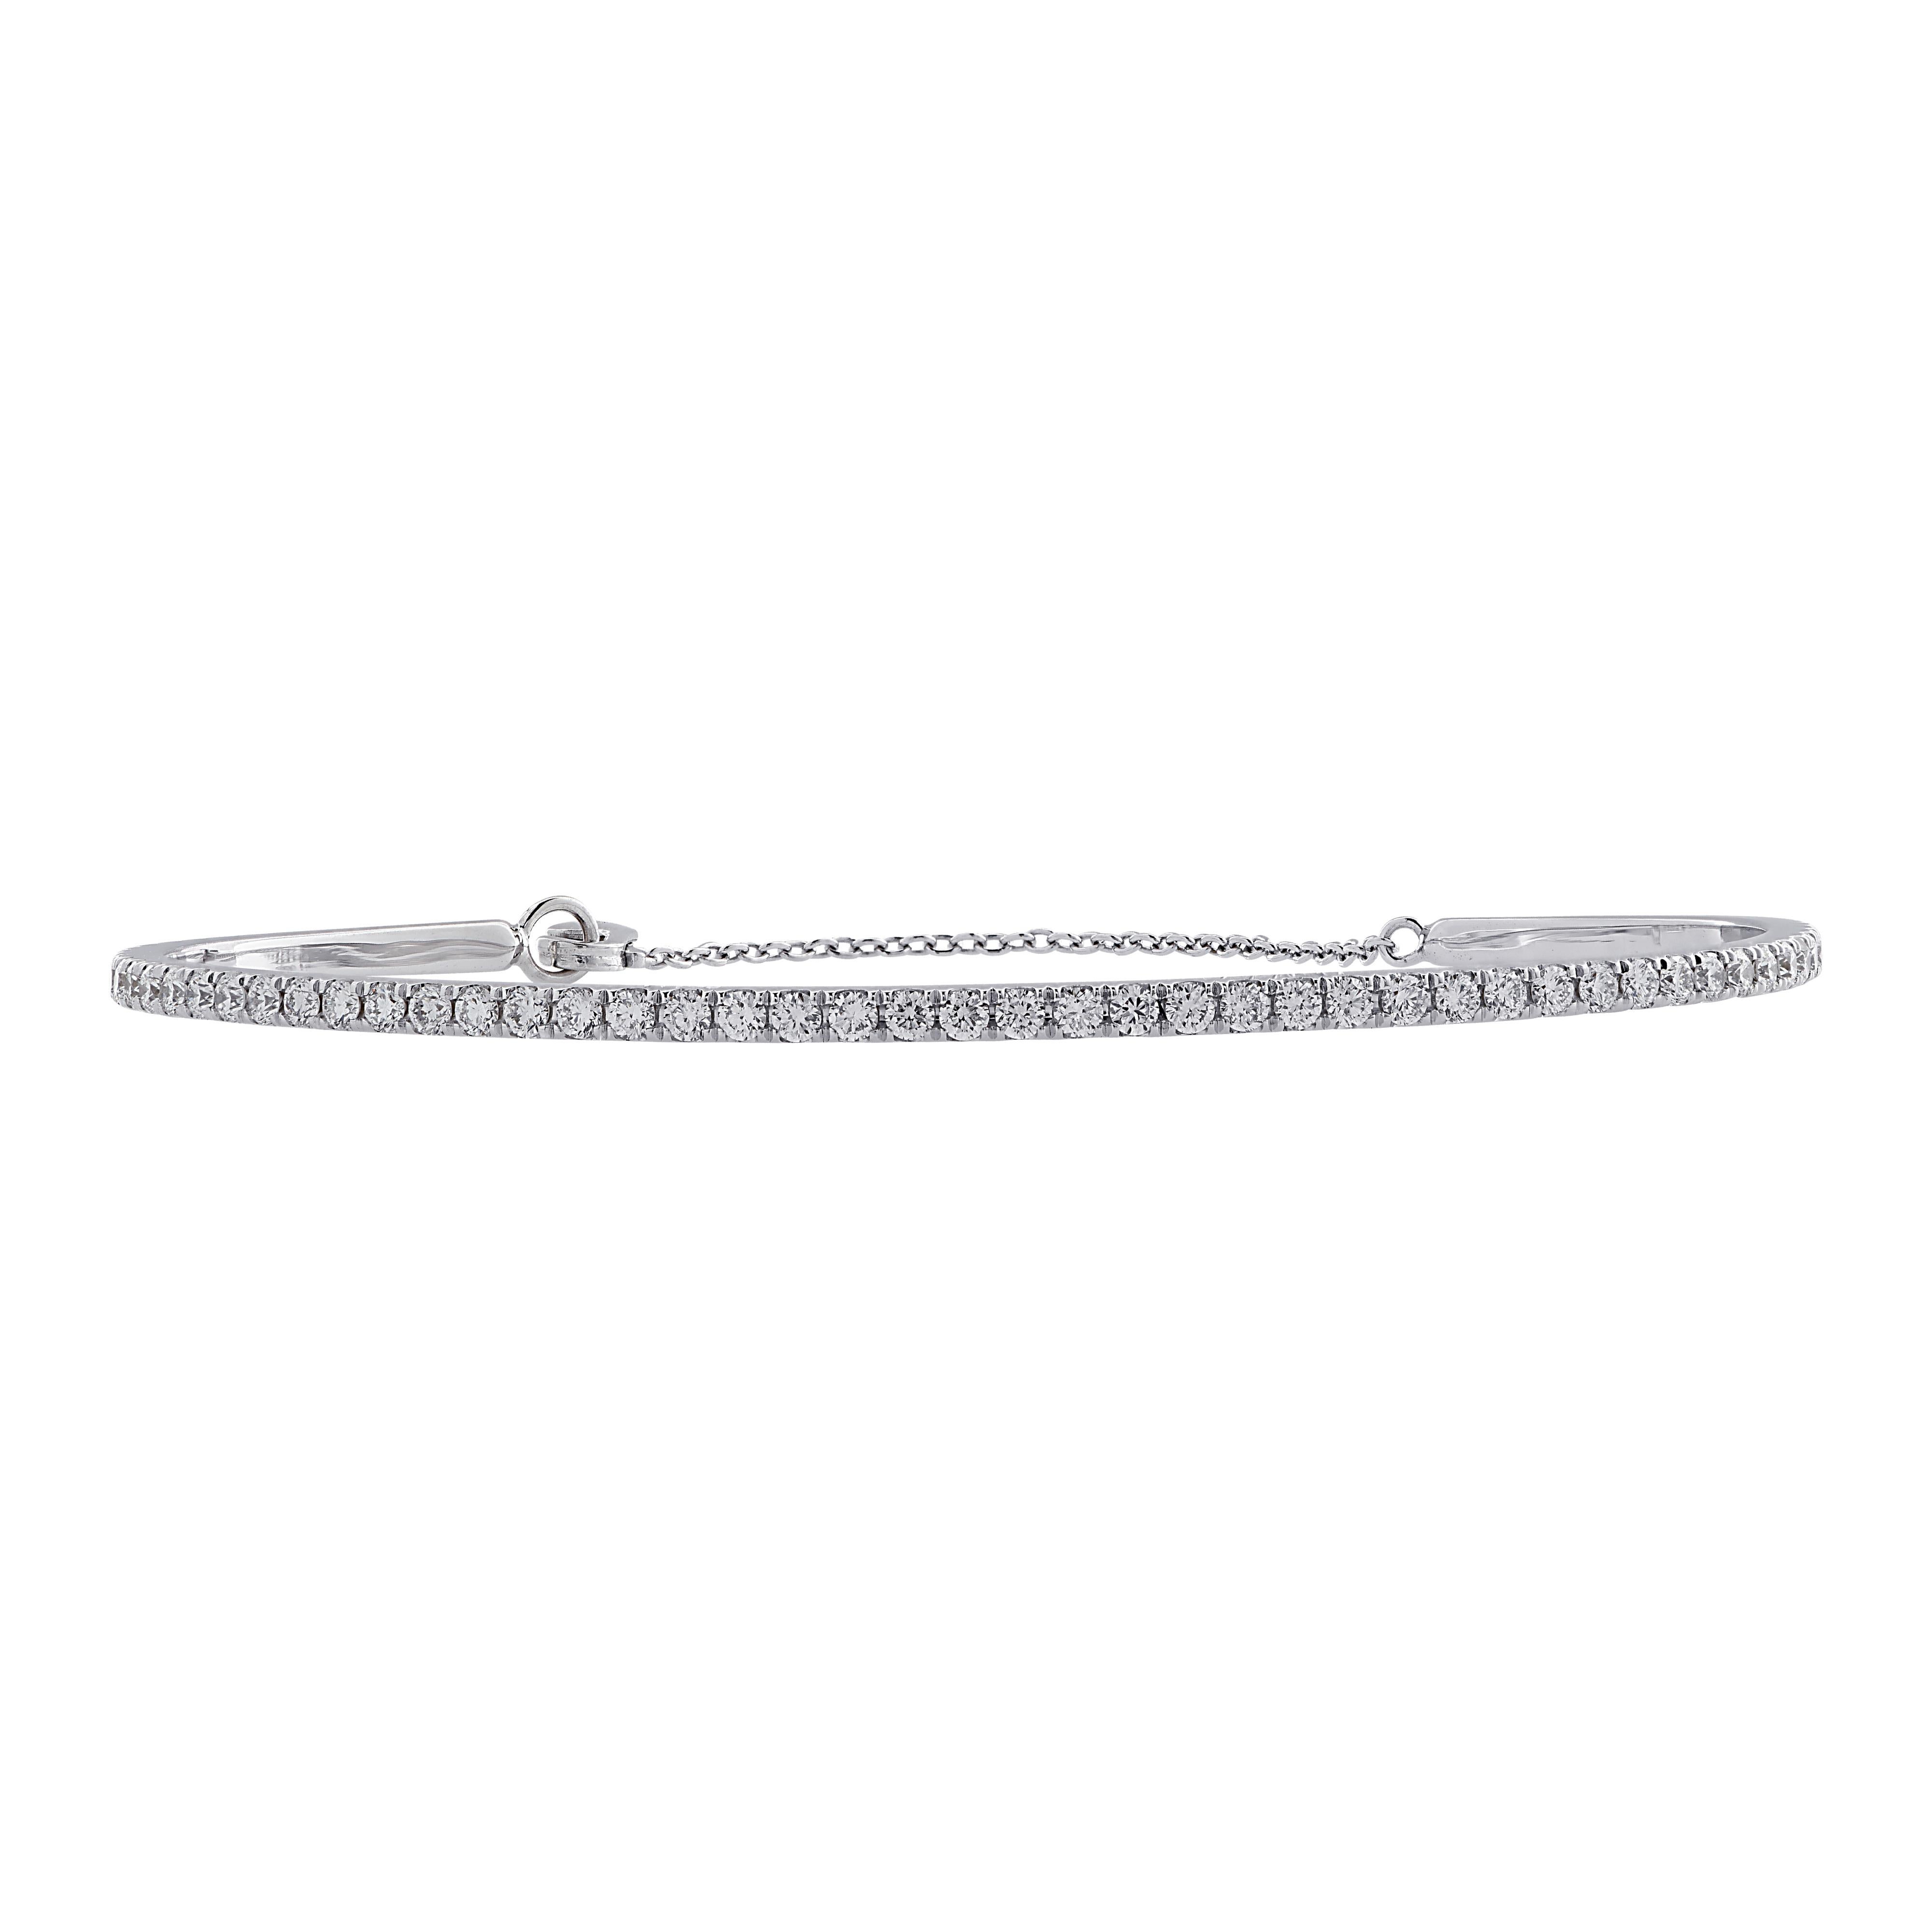 Stunning cuff bangle bracelet crafted in 18 karat white gold showcasing 69 round brilliant cut diamonds weighing 1.25 carats total G color, VS clarity. This elegant bracelet measures 1.8 mm in width and weight 5.4 grams. The diameter measures 2.5